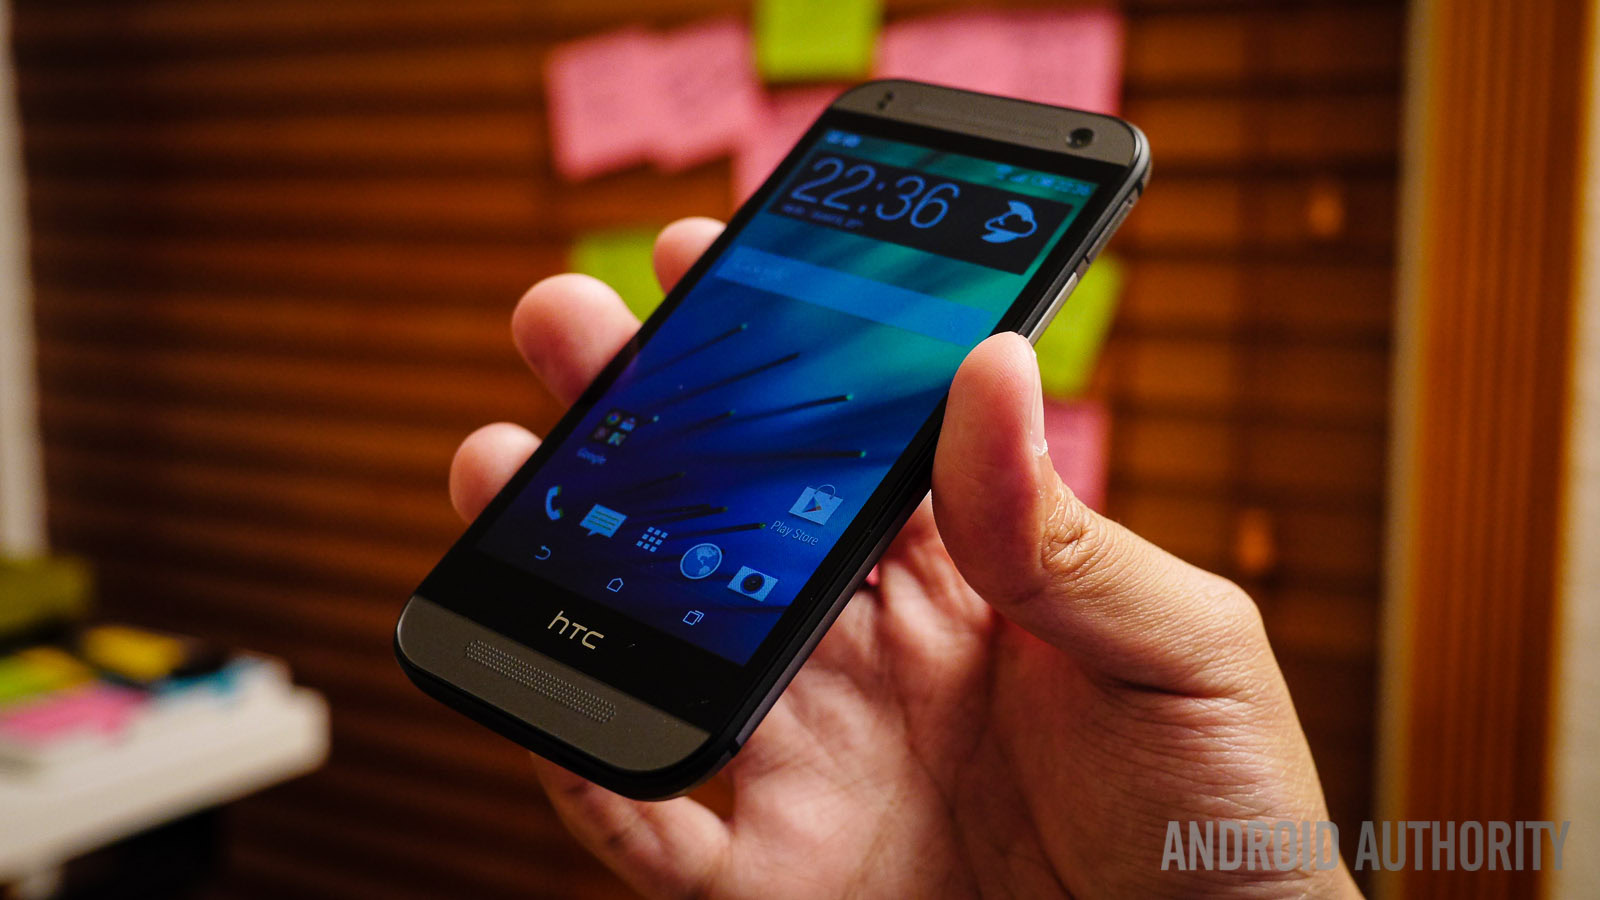 htc one mini 2 first look (7 of 22)